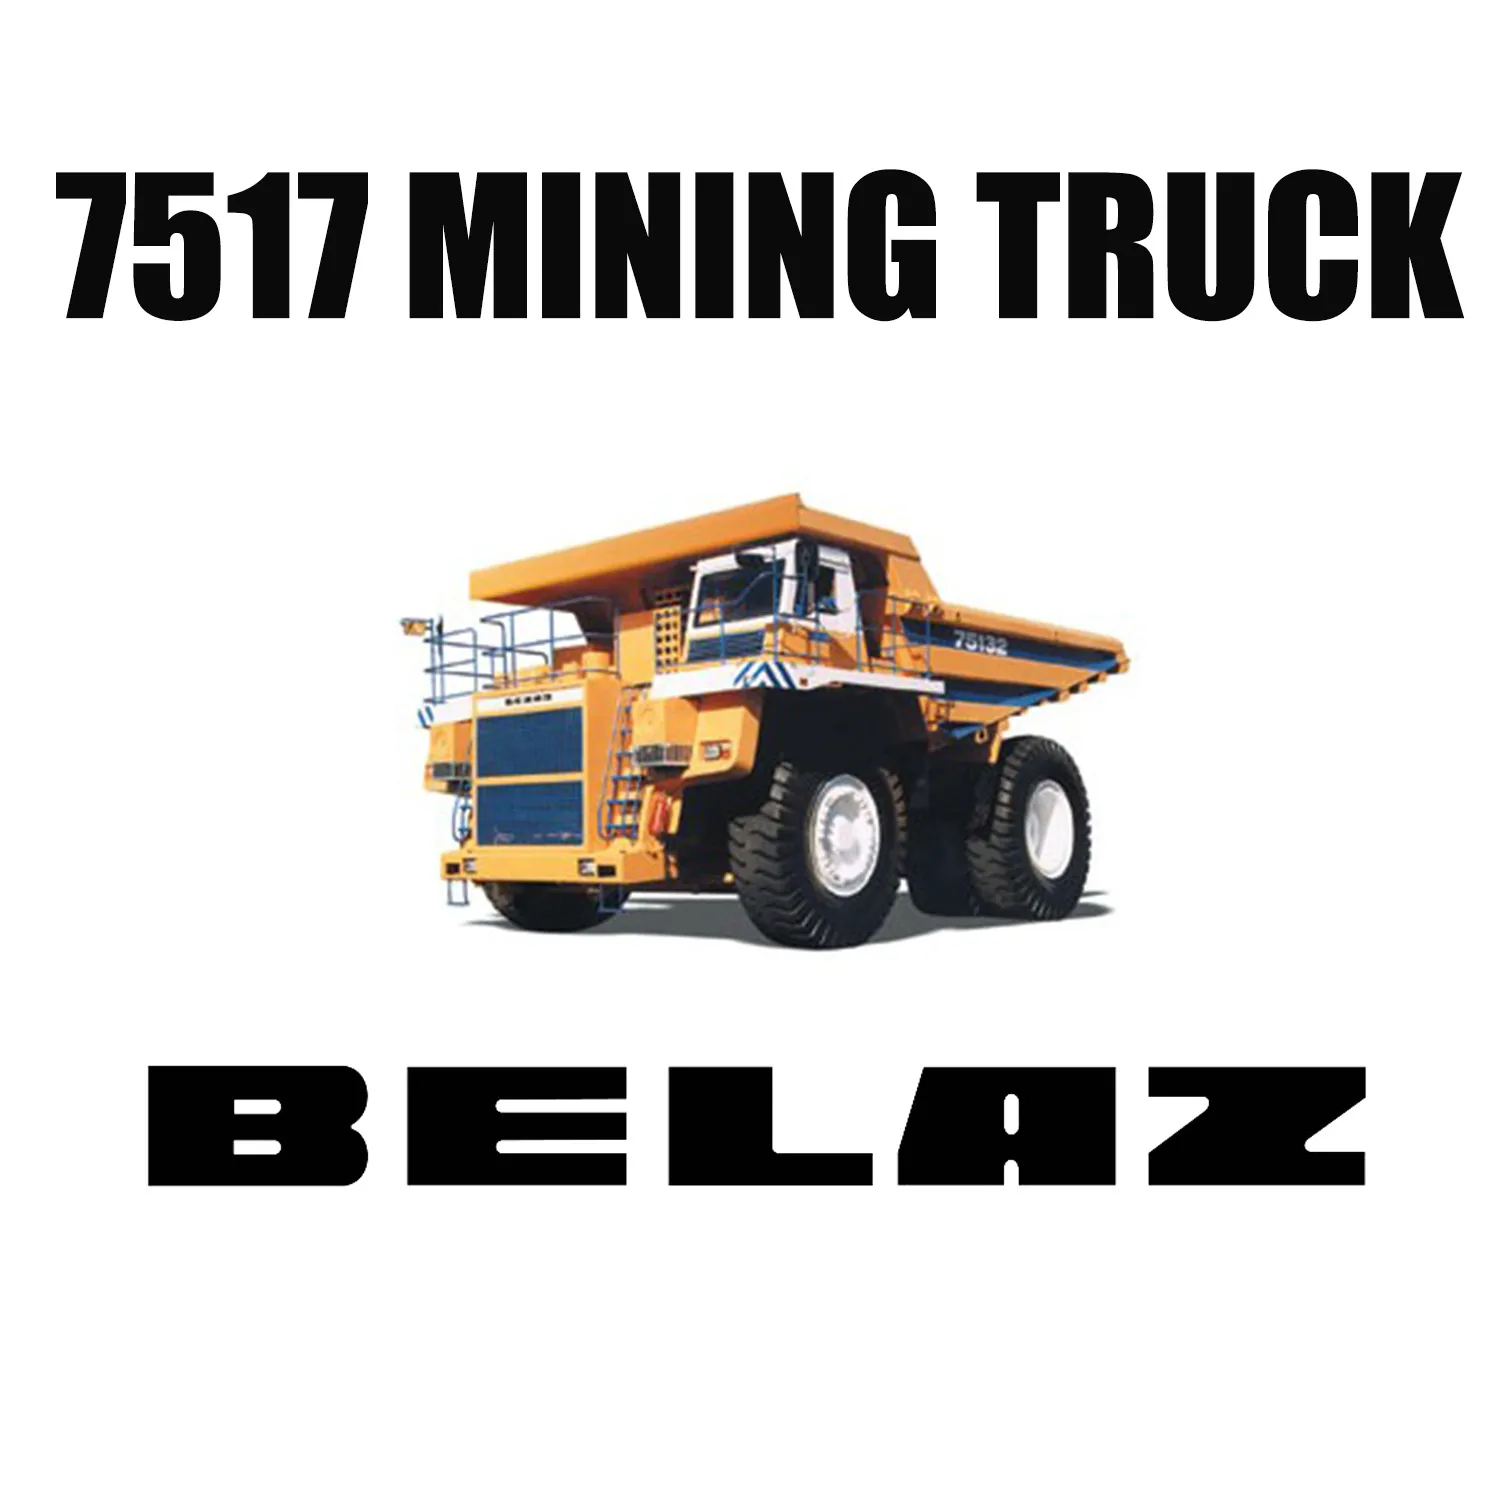 36.00R51 Off the Road Mining Tires fitted on BELAZ-7517 for Coal Mine